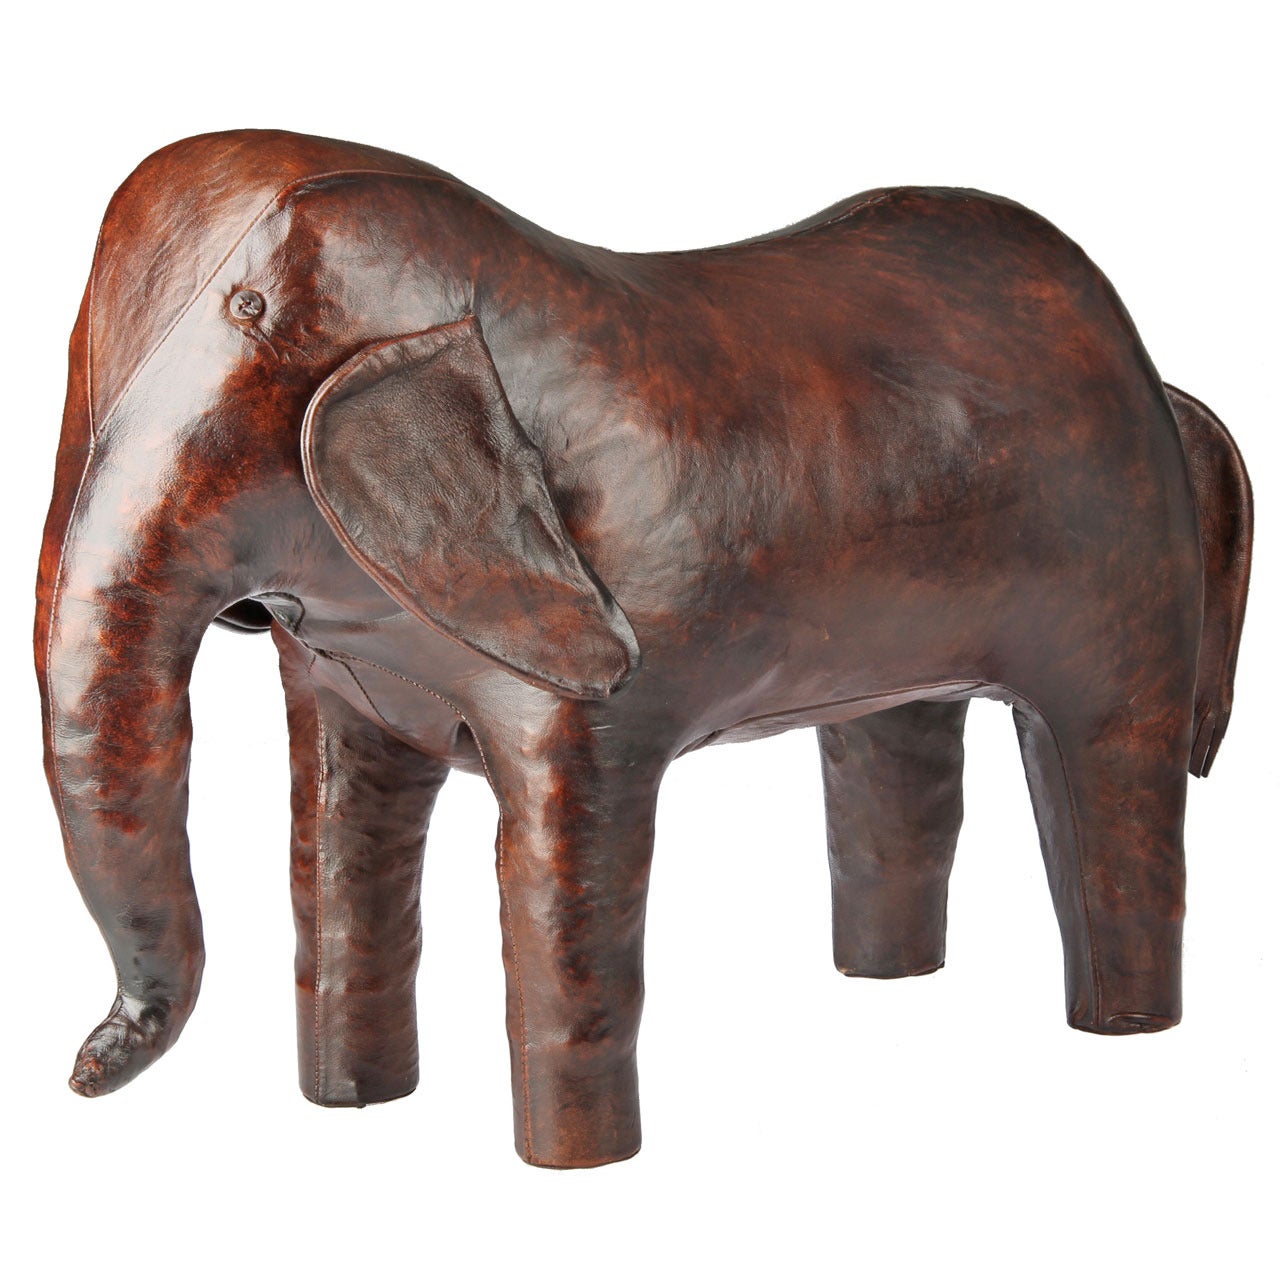 Leather Elephant by Dimitri Omersa for Abercrombie & Fitch